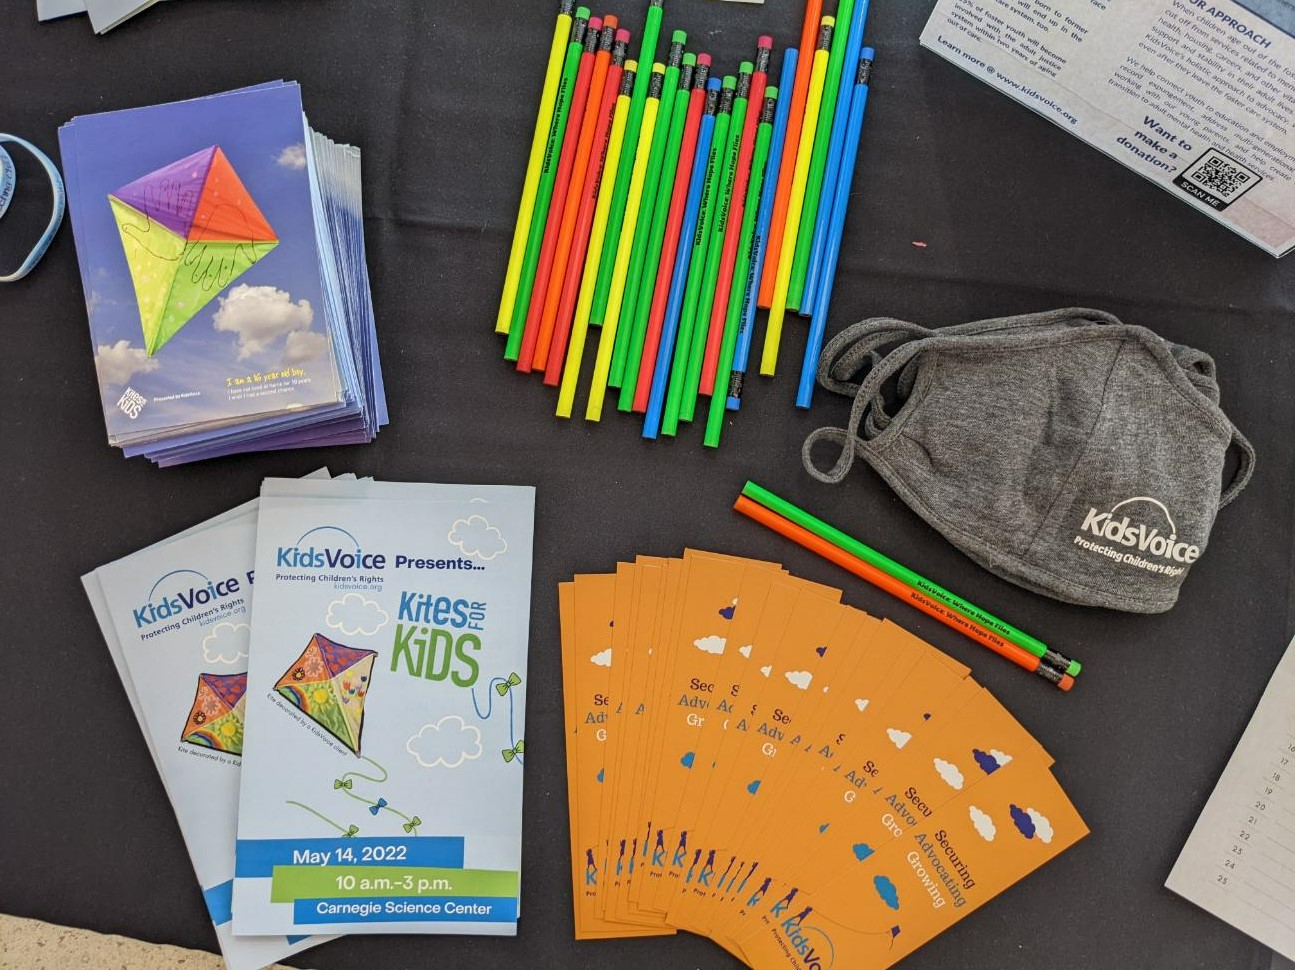 A display of KidsVoice branded supplies, including colorful pencils, facial masks, and bright orange bookmarks